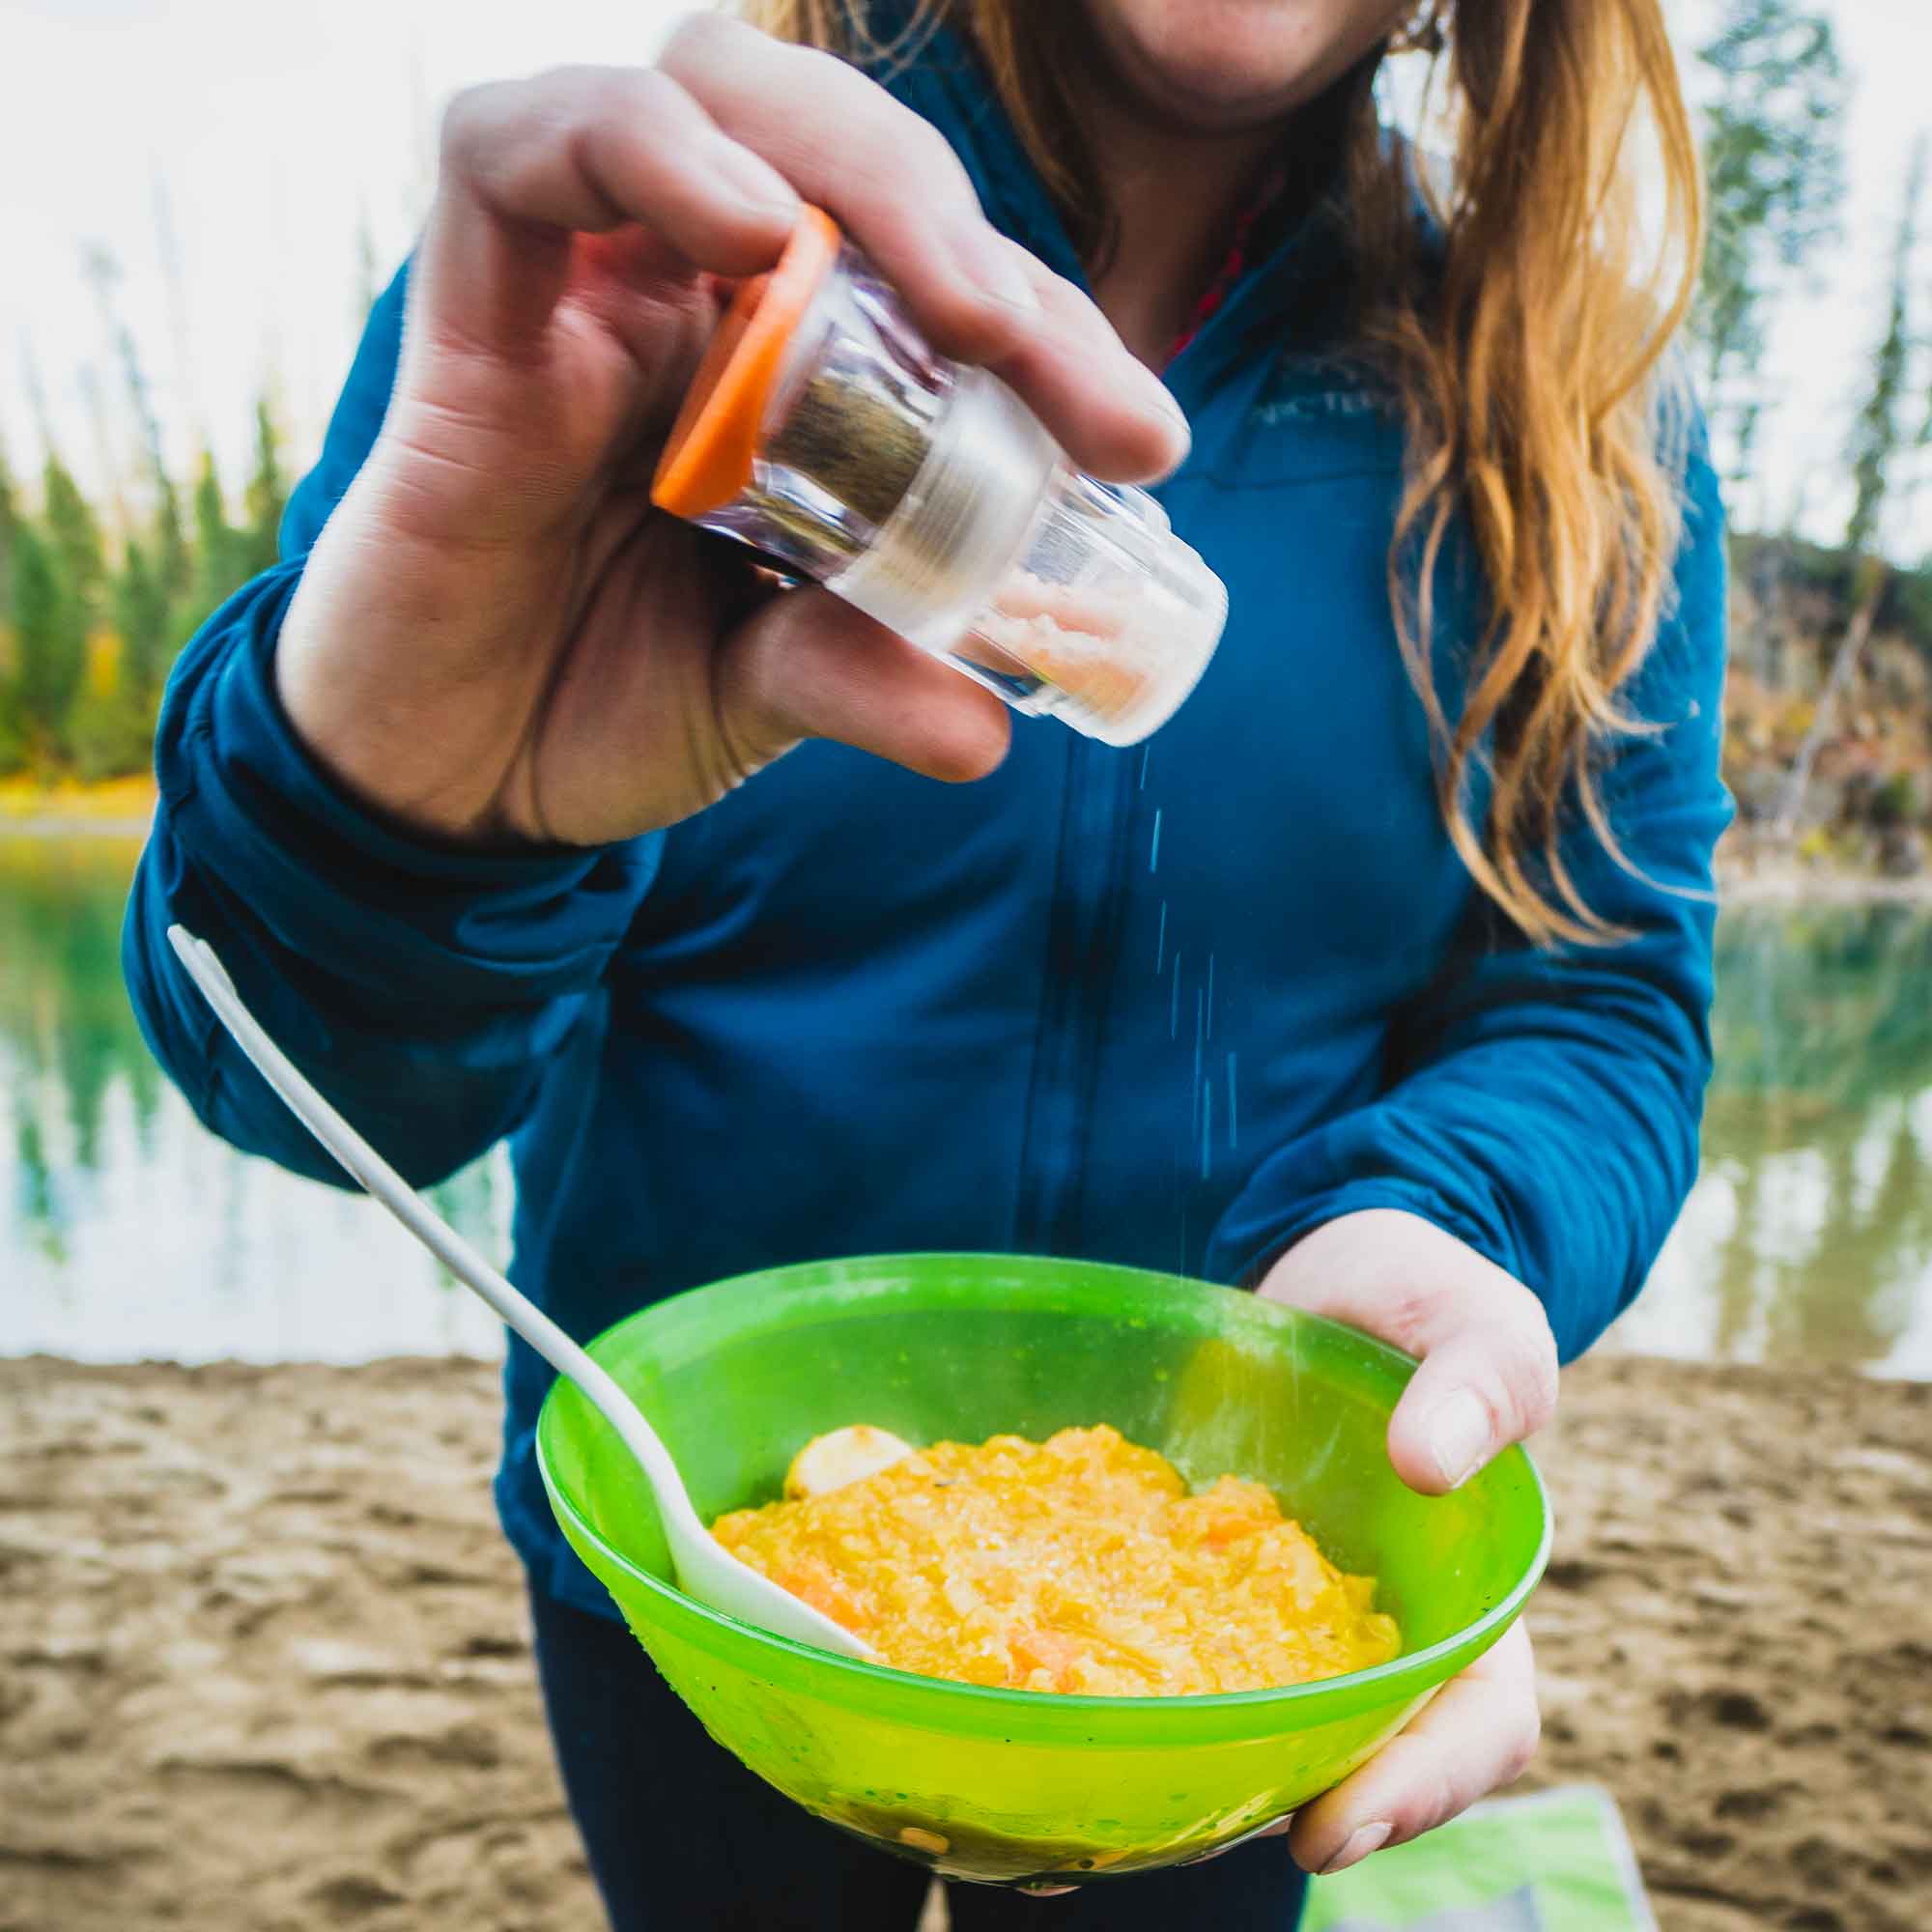 Spice Missile Portable Seasoning Container | GSI Outdoors